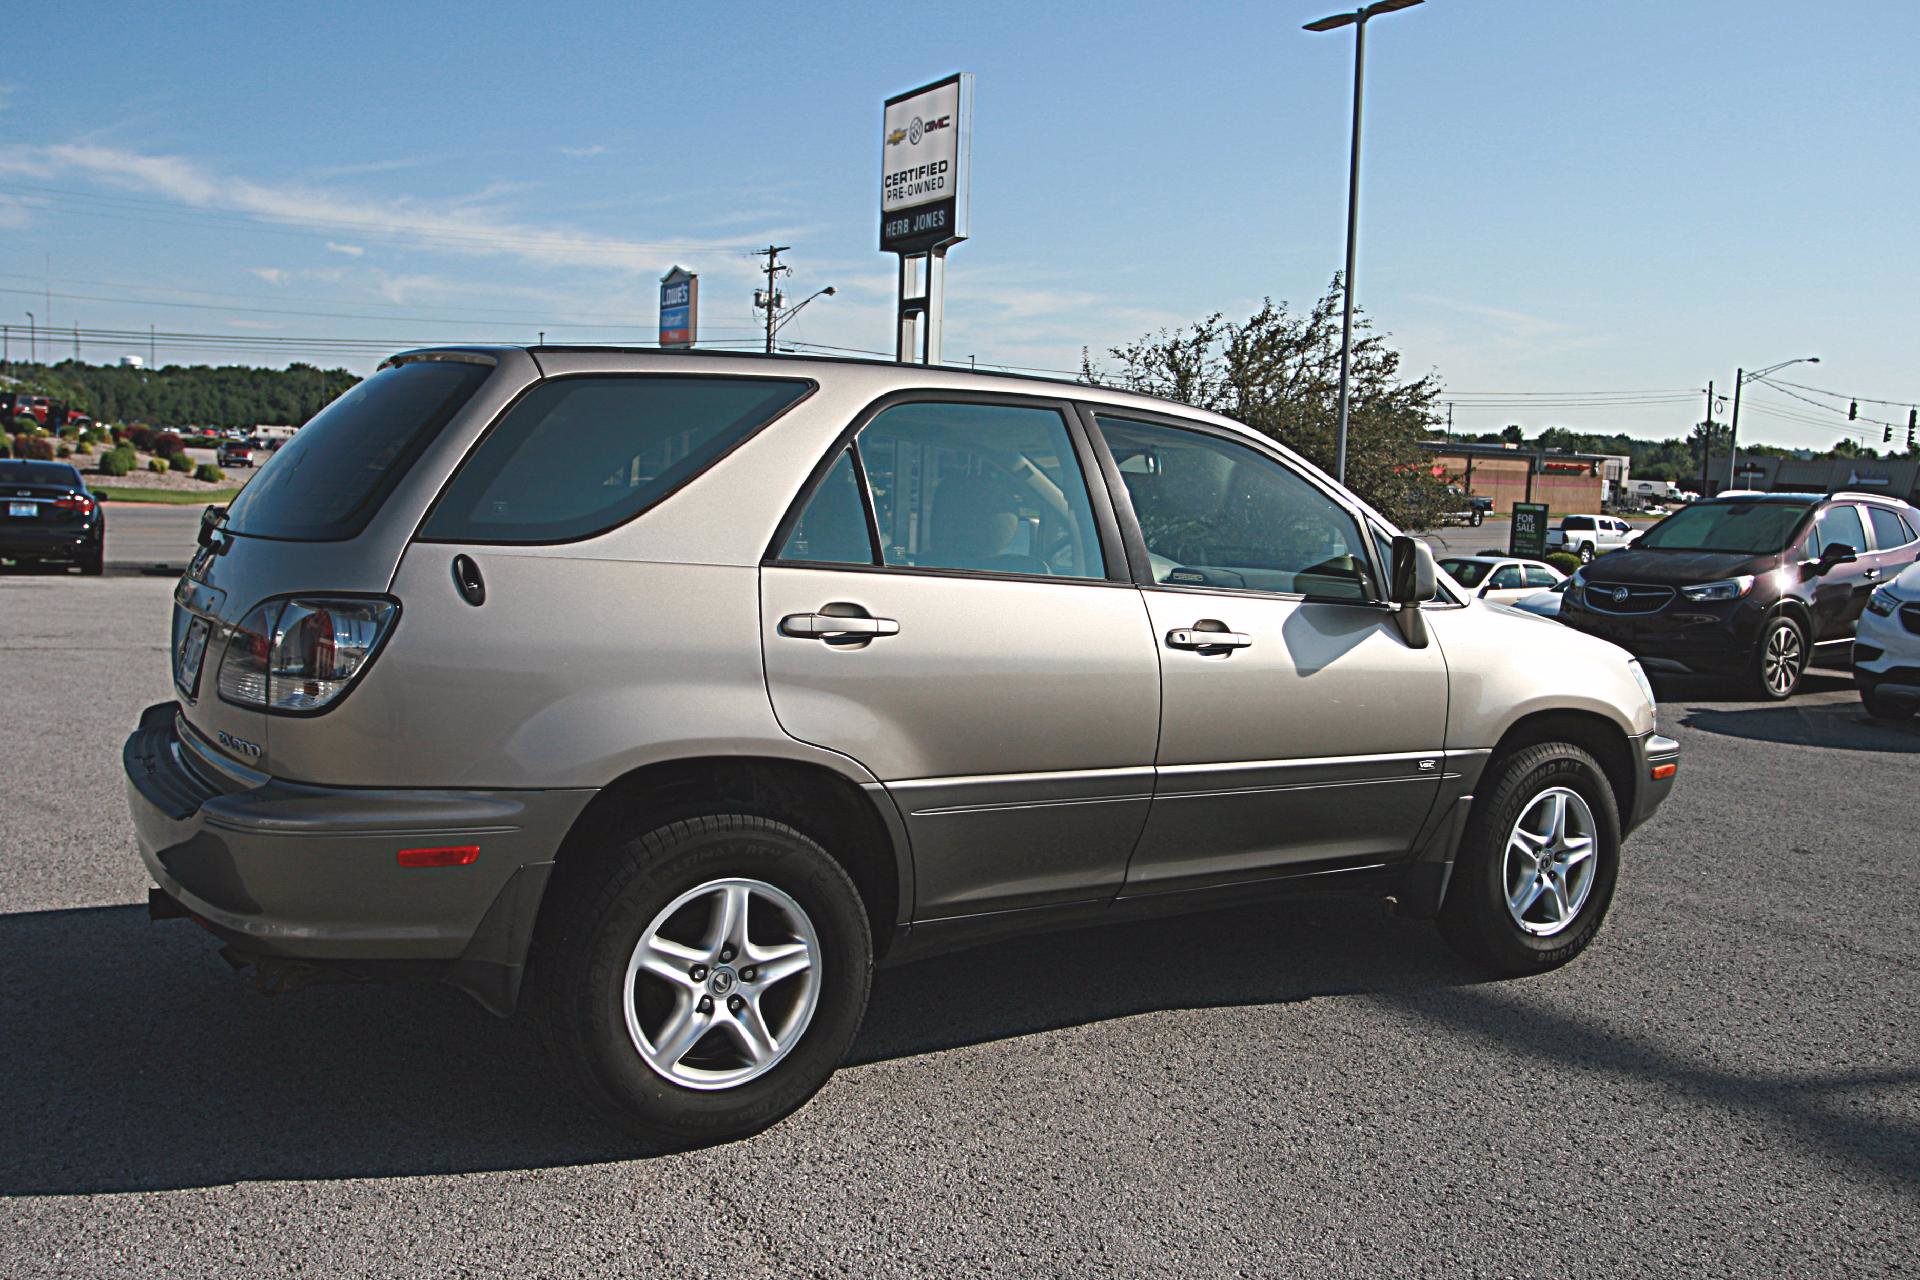 PreOwned 2001 Lexus RX 300 4DR AWD 4WD